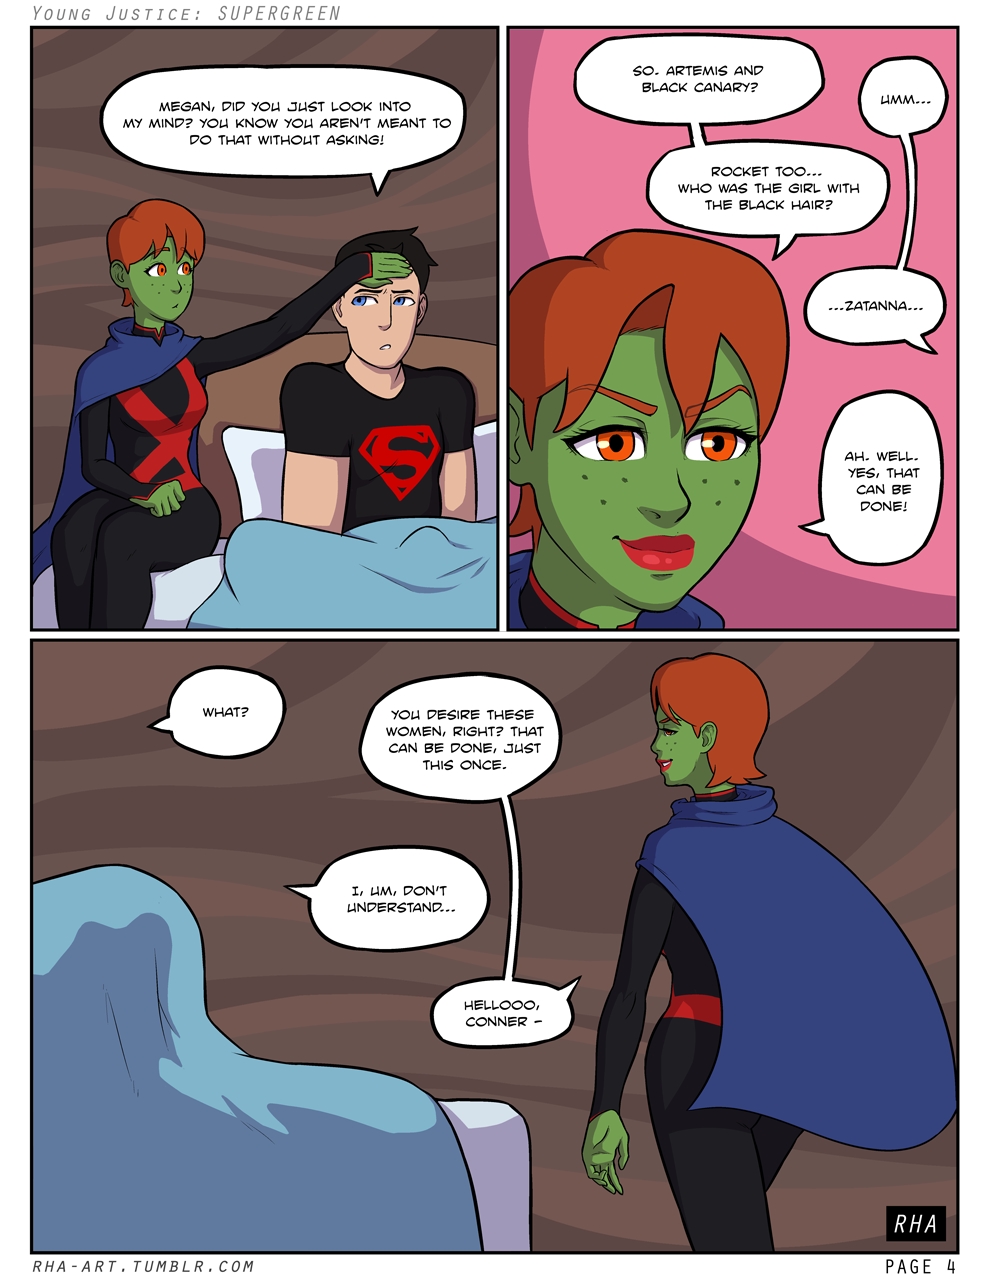 [Rha] Young Justice: Supergreen (Young Justice) 4